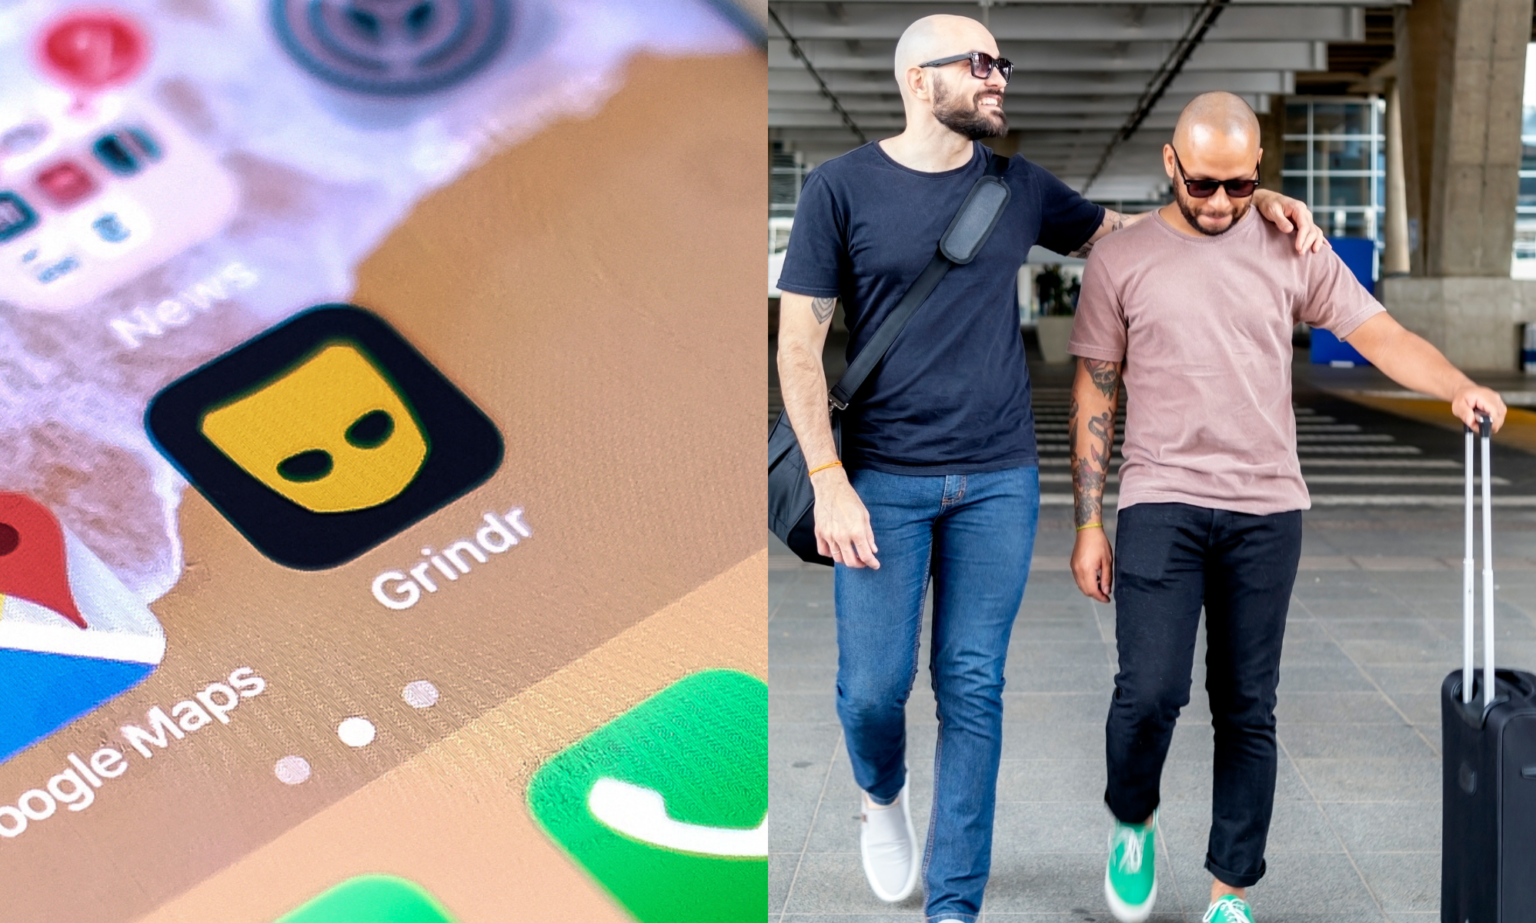 Grindr’s new travel feature is for catching flights and feelings